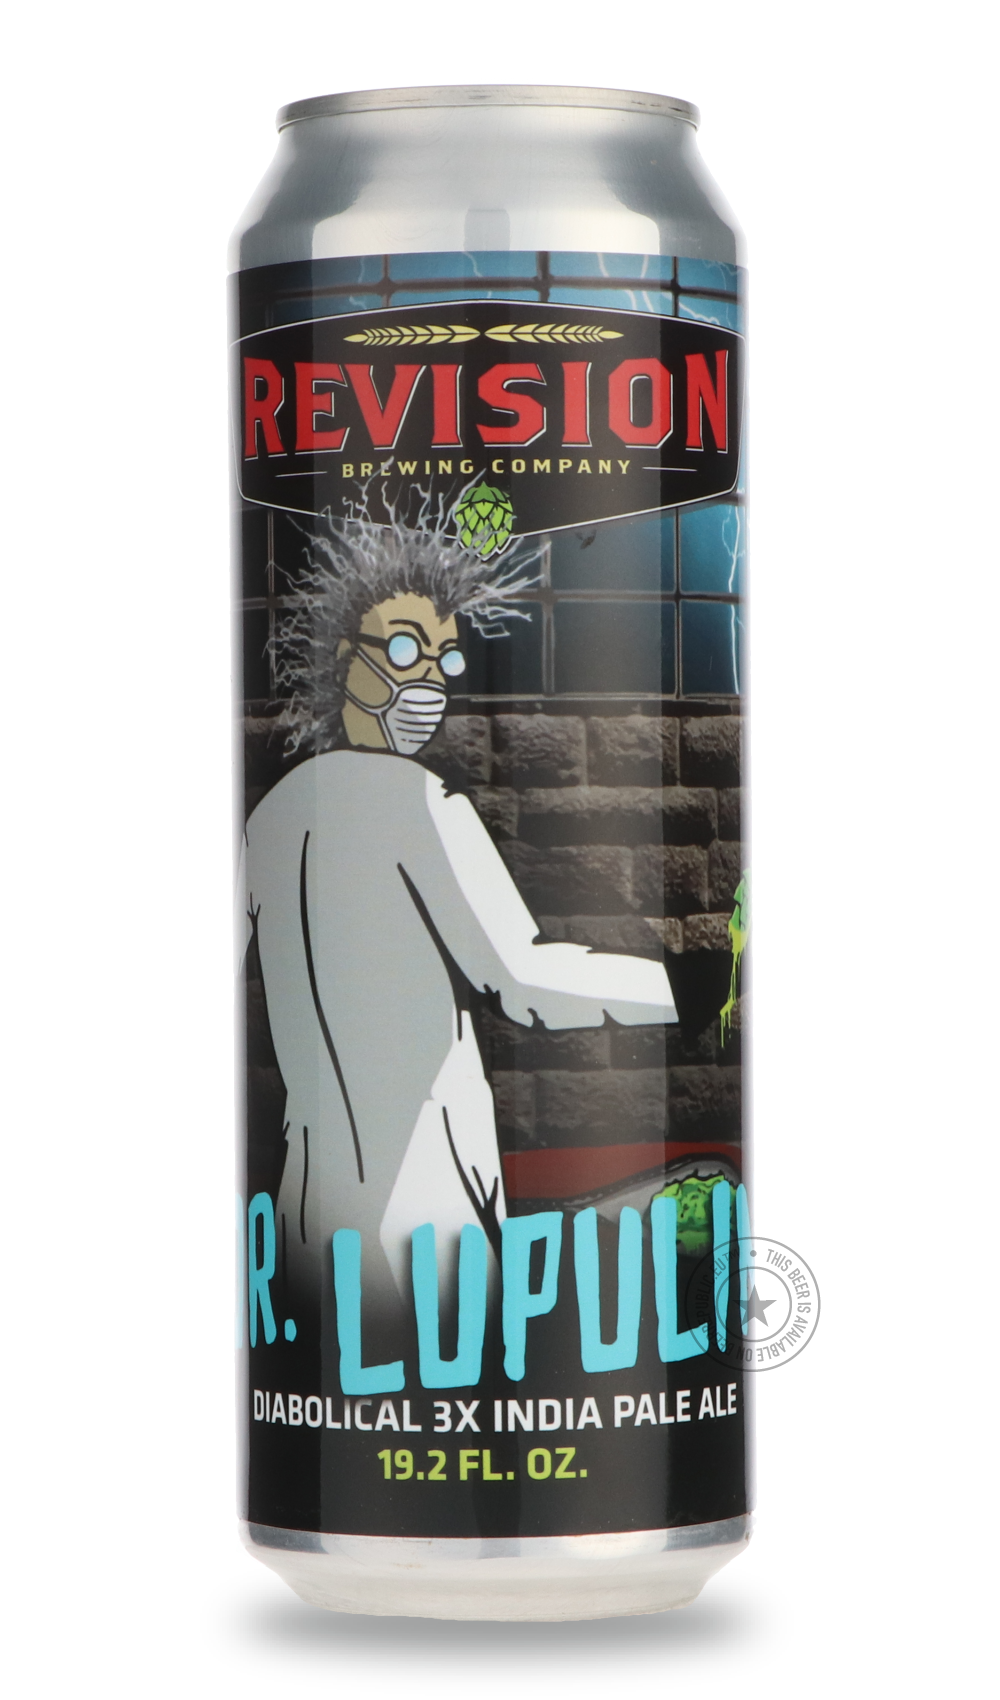 -Revision- Dr. Lupulin 3x-IPA- Only @ Beer Republic - The best online beer store for American & Canadian craft beer - Buy beer online from the USA and Canada - Bier online kopen - Amerikaans bier kopen - Craft beer store - Craft beer kopen - Amerikanisch bier kaufen - Bier online kaufen - Acheter biere online - IPA - Stout - Porter - New England IPA - Hazy IPA - Imperial Stout - Barrel Aged - Barrel Aged Imperial Stout - Brown - Dark beer - Blond - Blonde - Pilsner - Lager - Wheat - Weizen - Amber - Barley 